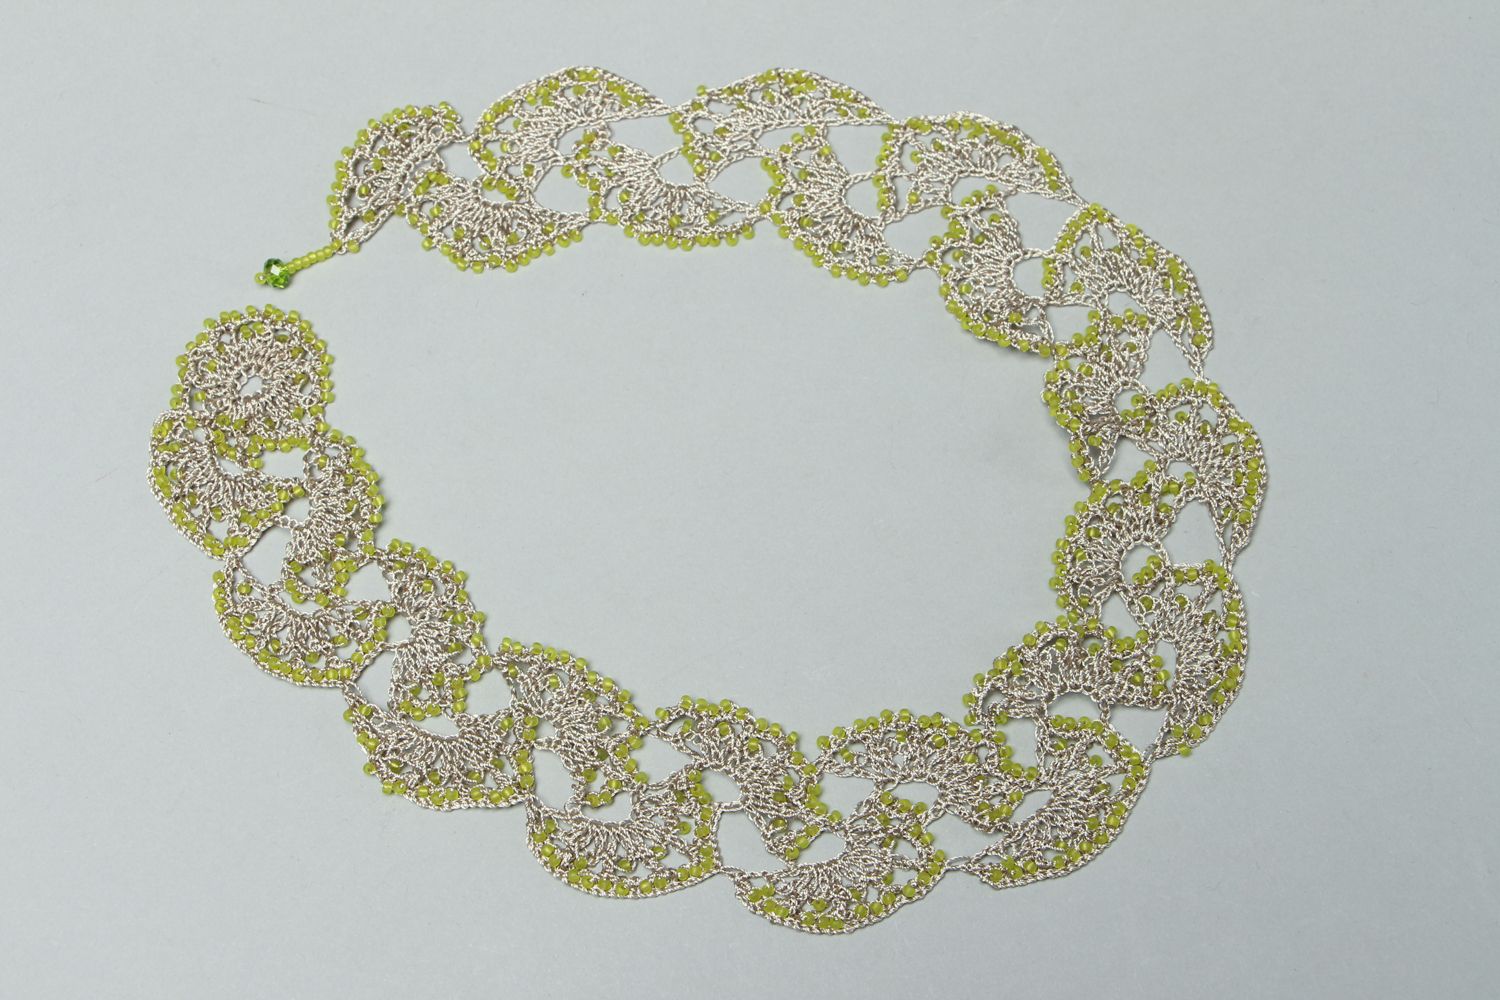 Lacy crochet necklace with beads photo 1